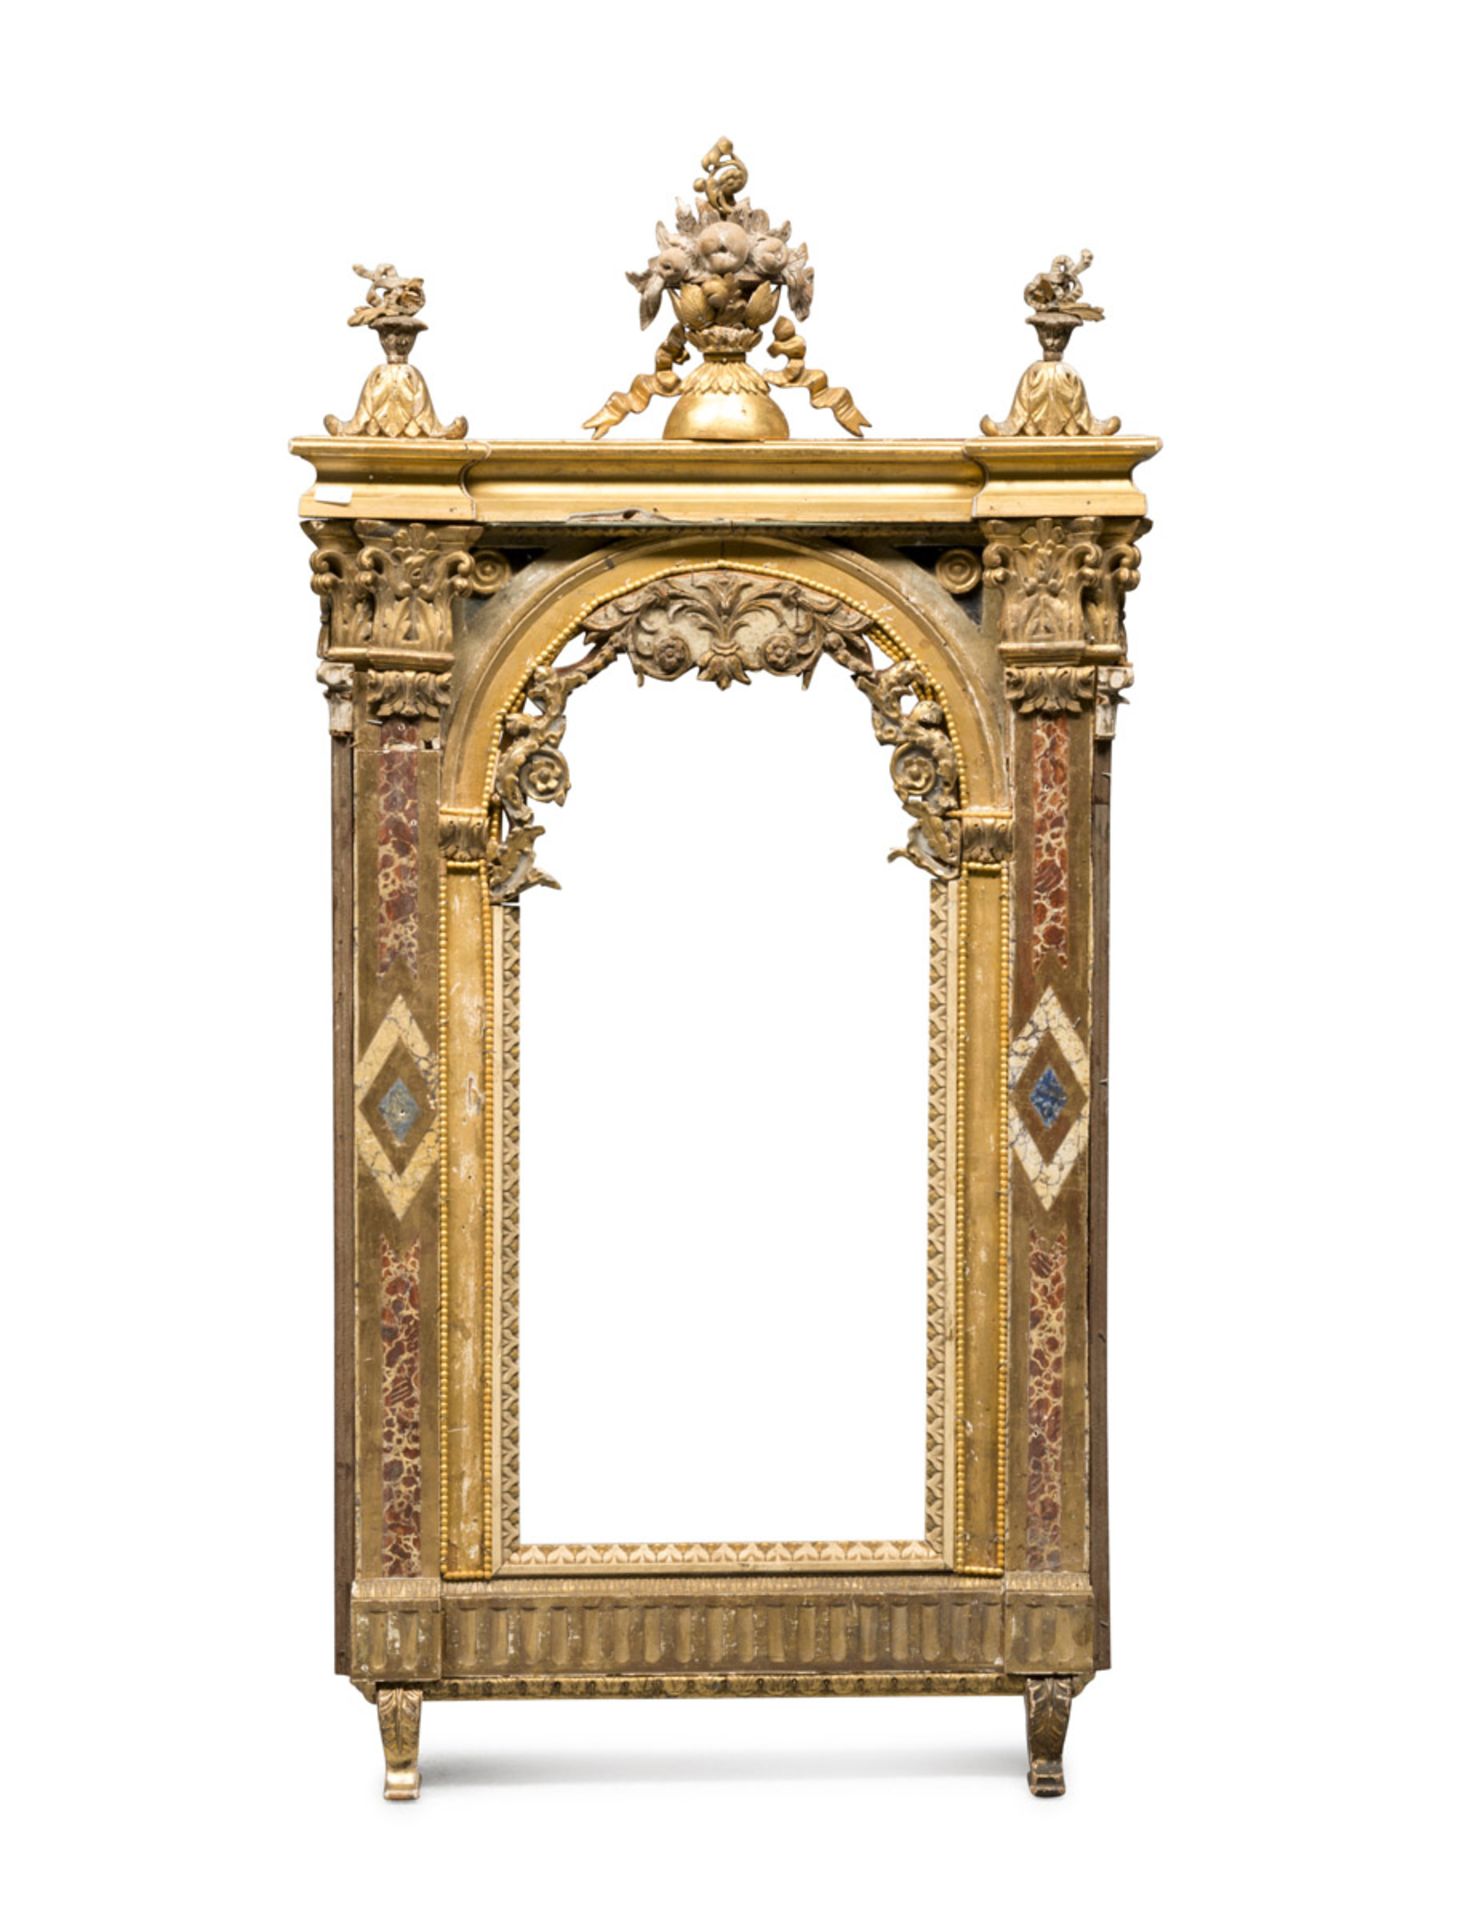 FRAME OF MIRROR IN GILDED AND LACQUERED WOOD, ELEMENTS OF THE 18TH CENTURY with arch and side